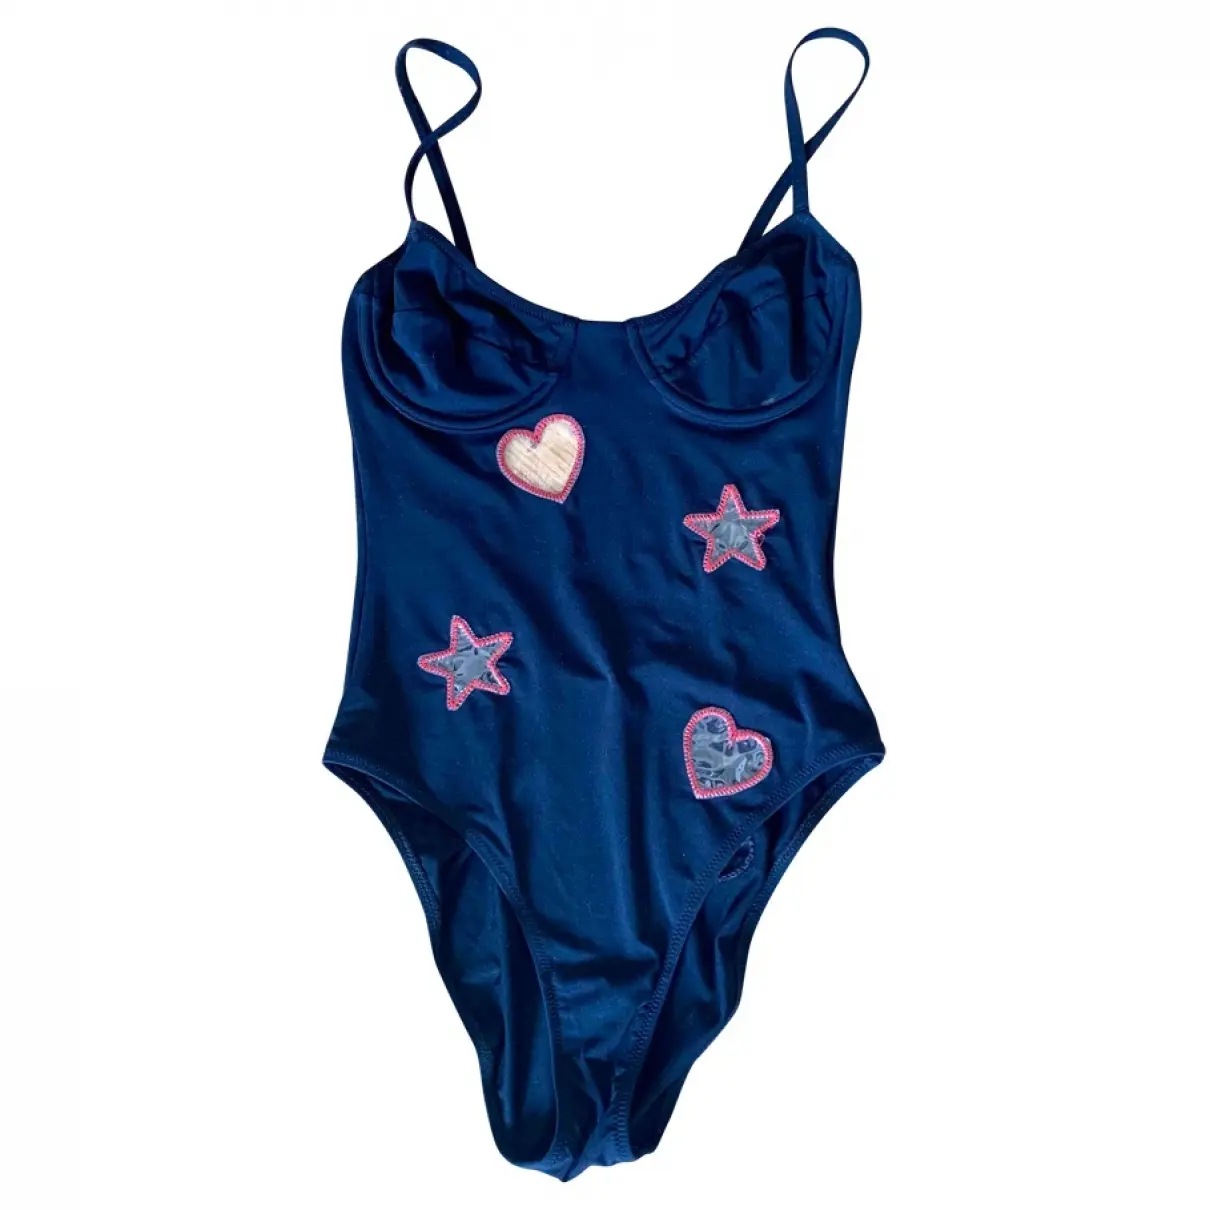 One-piece swimsuit Moschino - Vintage